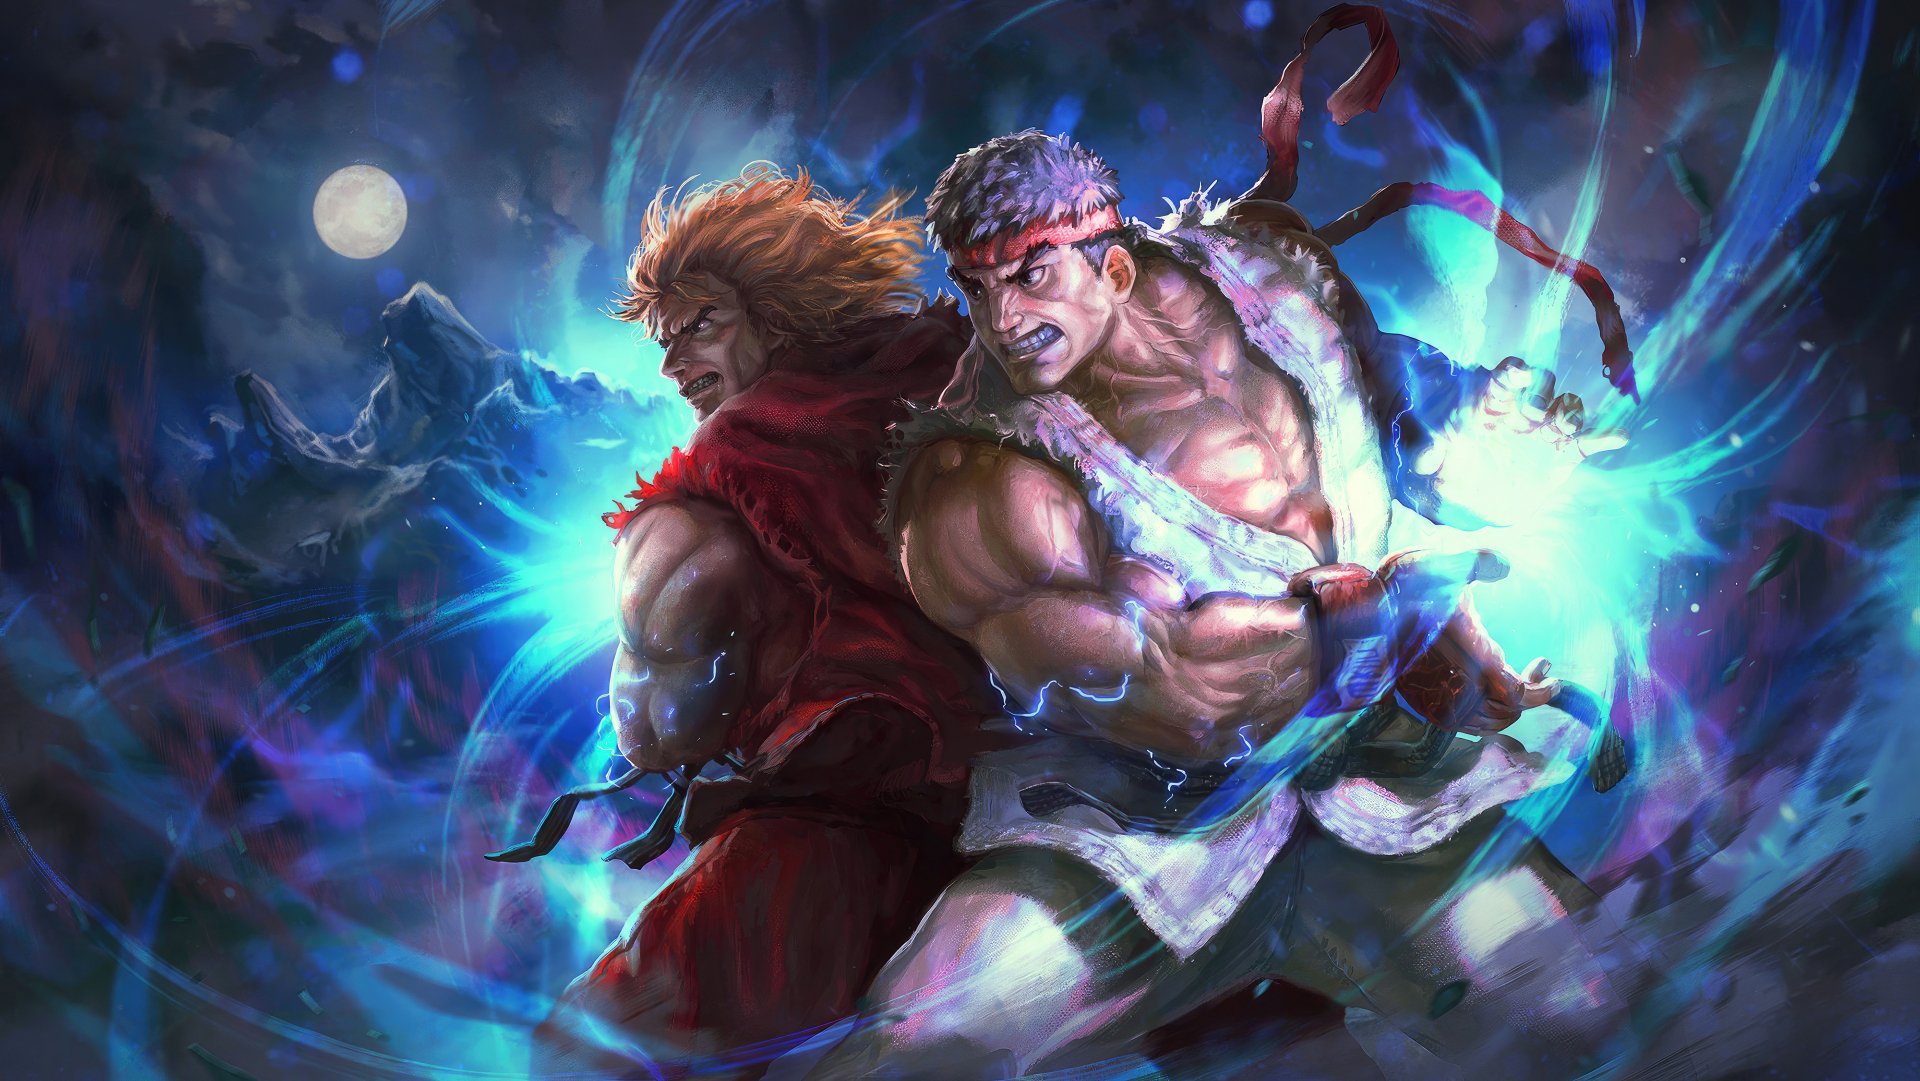 Download Akuma Street Fighter wallpapers for mobile phone free Akuma Street  Fighter HD pictures